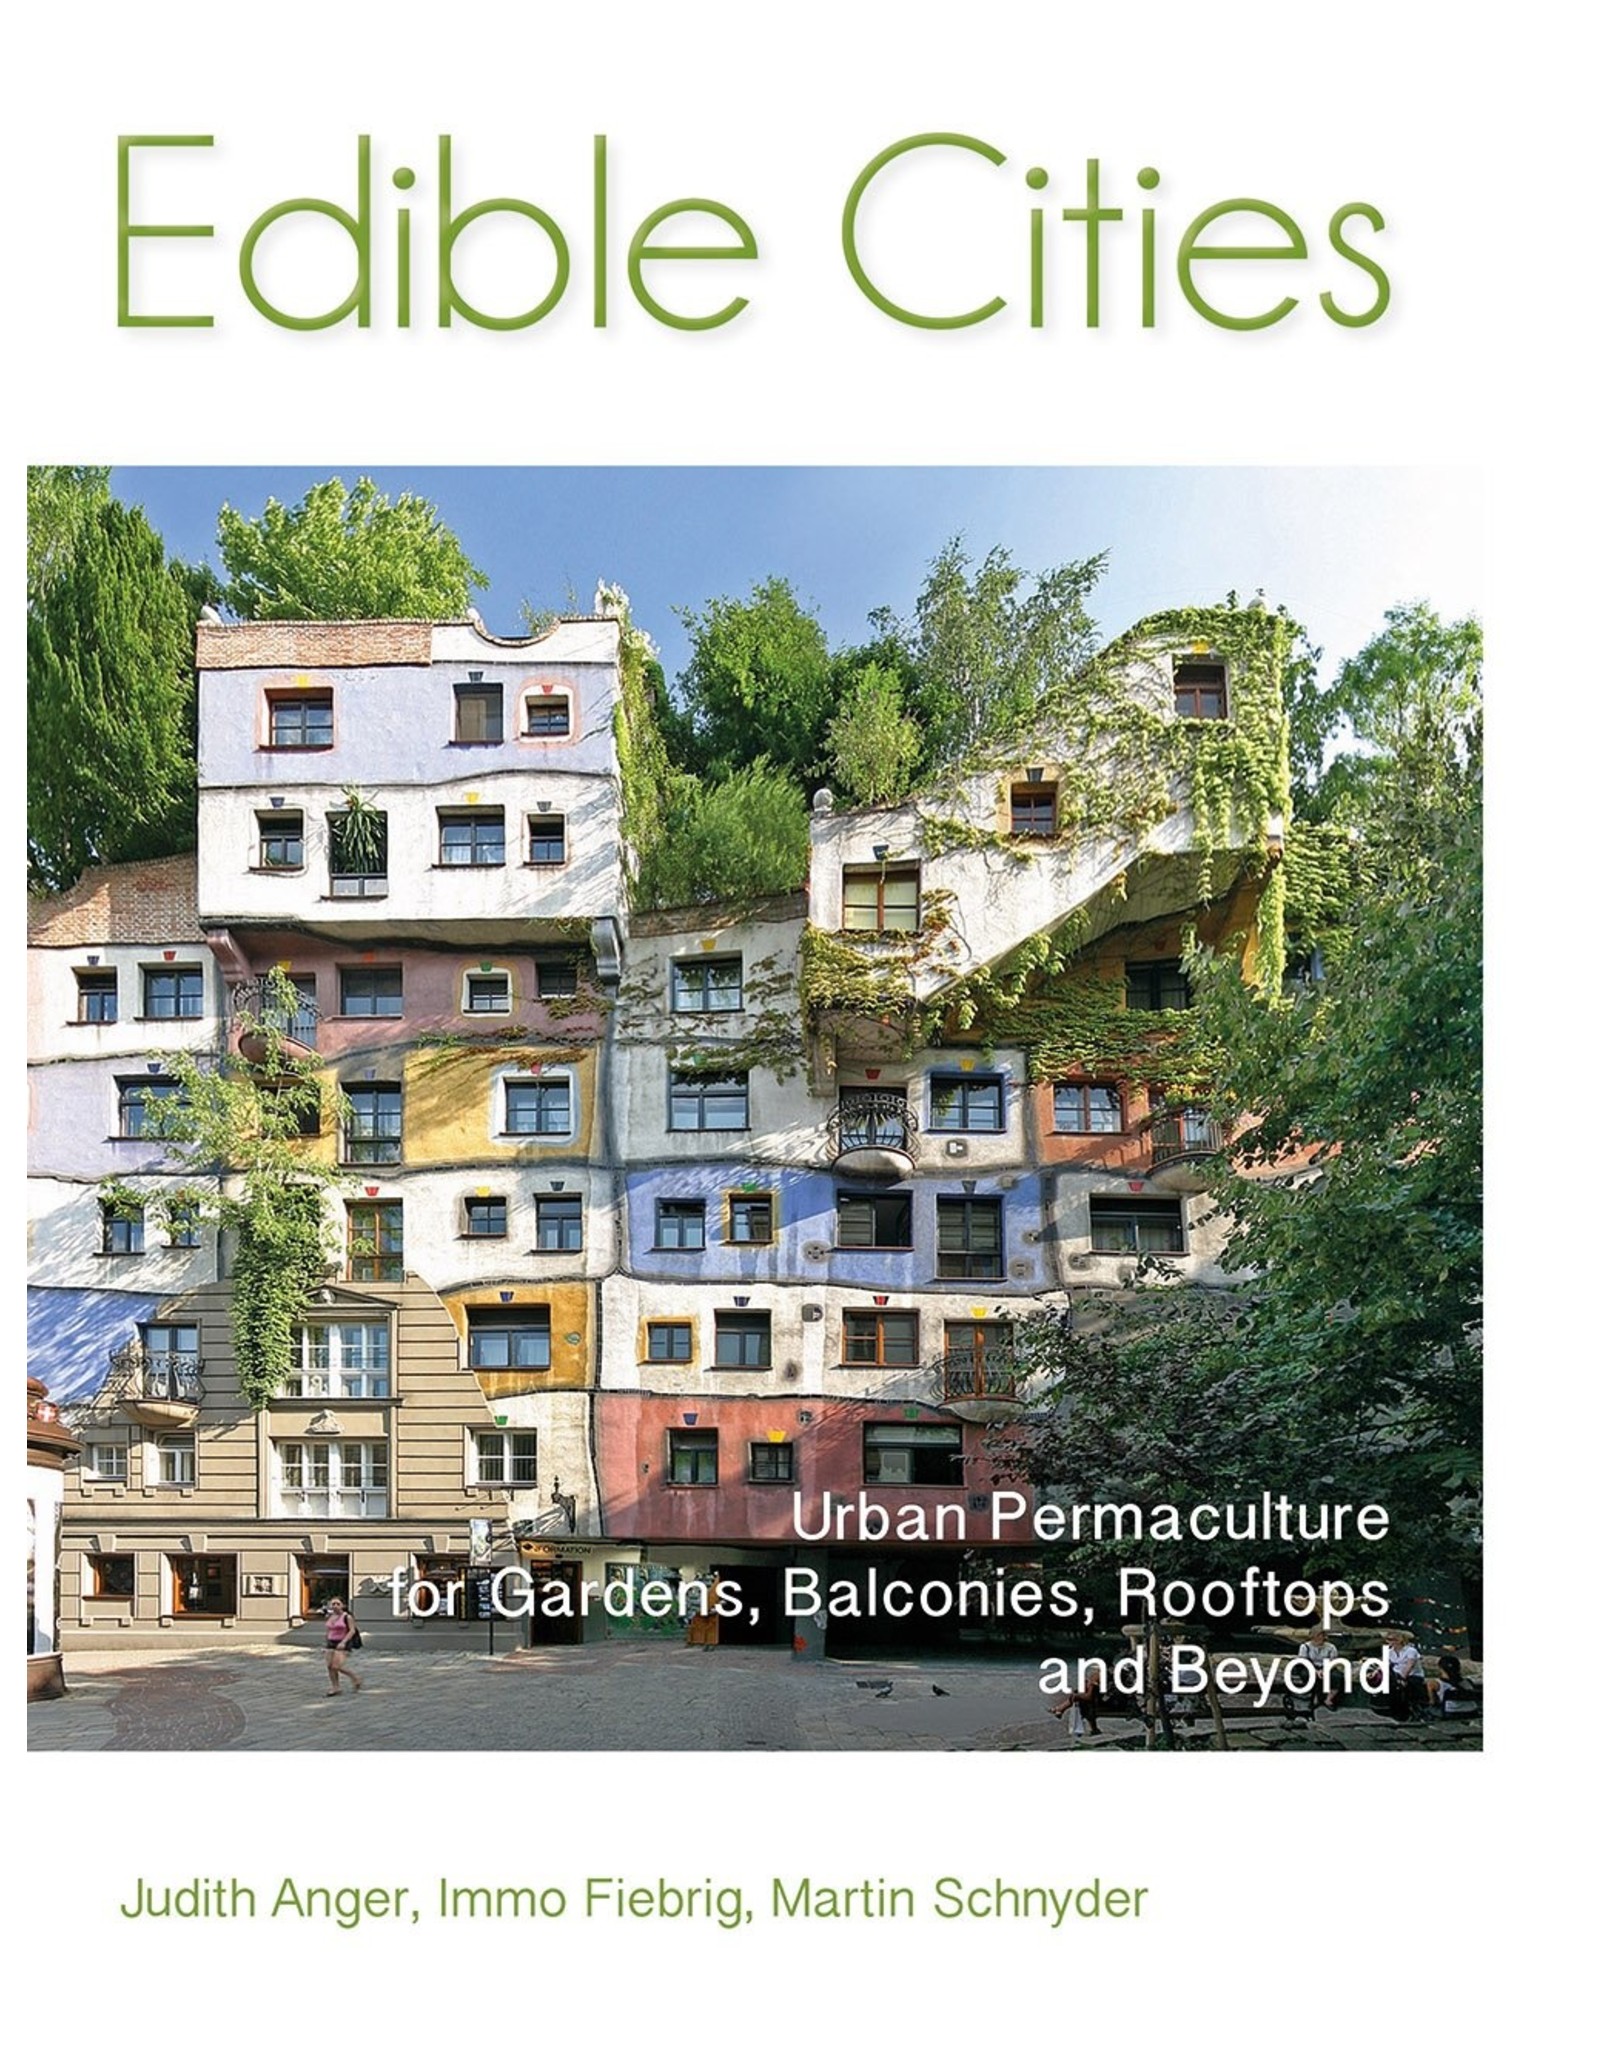 Literature Edible Cities: Urban Permaculture for Gardens, Balconies, Rooftops and Beyond